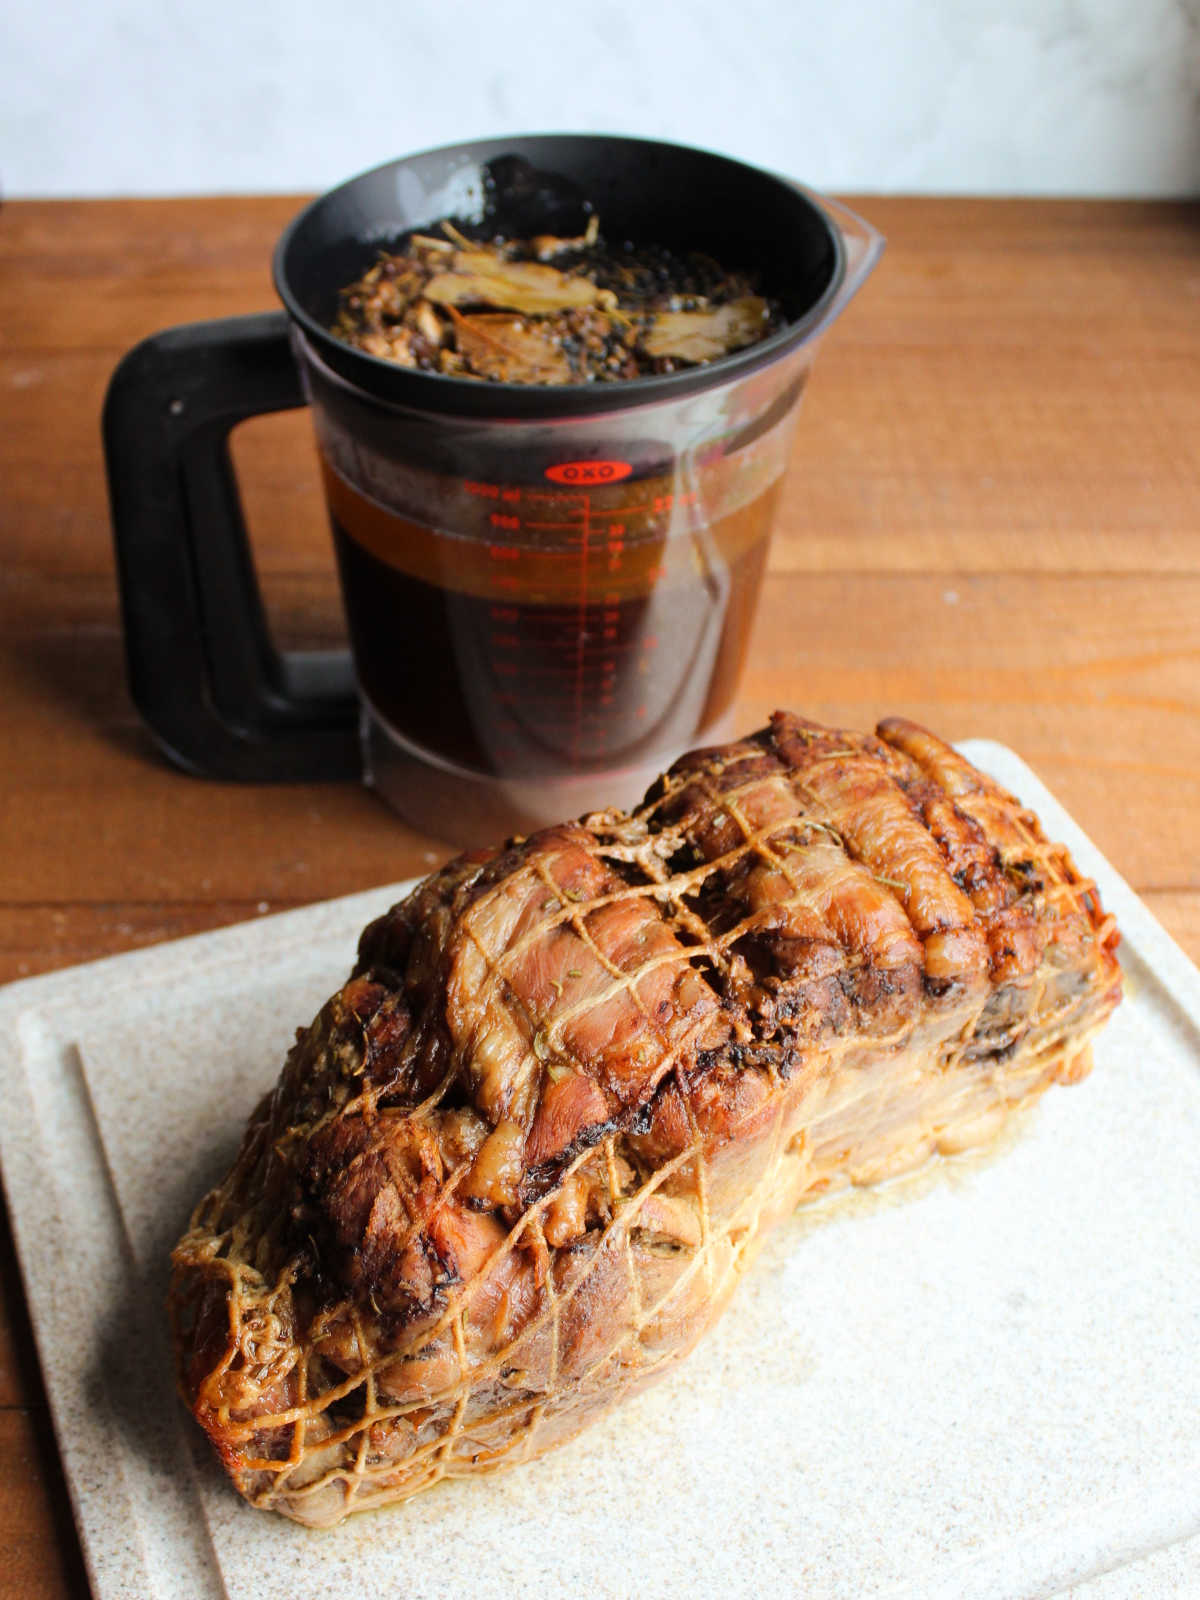 Cooked pork shoulder roast on cutting board with fat separator in the background showing balsamic layer and fat layer.